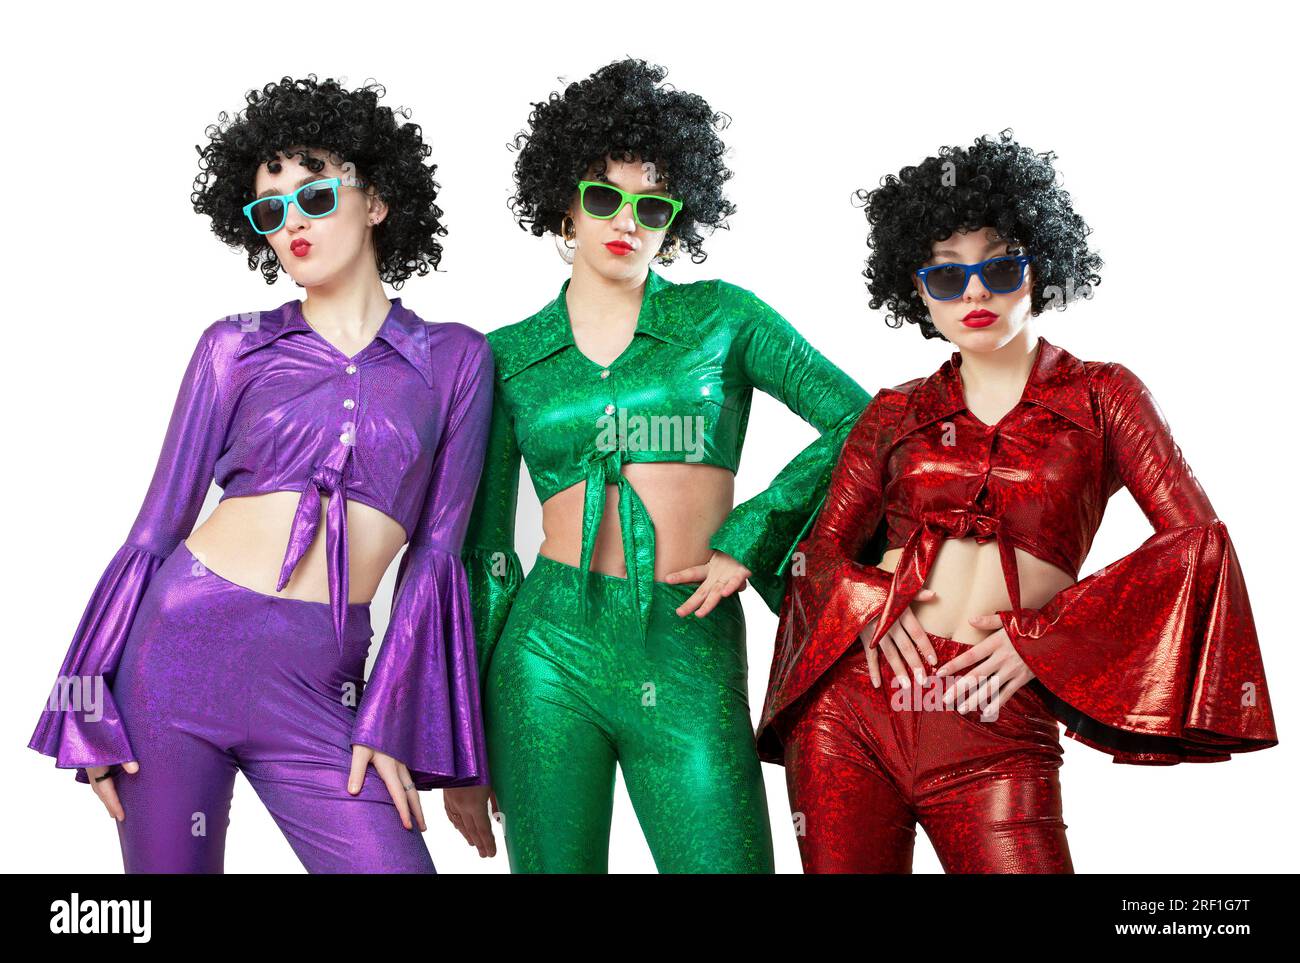 A group of disco girls in African American wigs and colorful